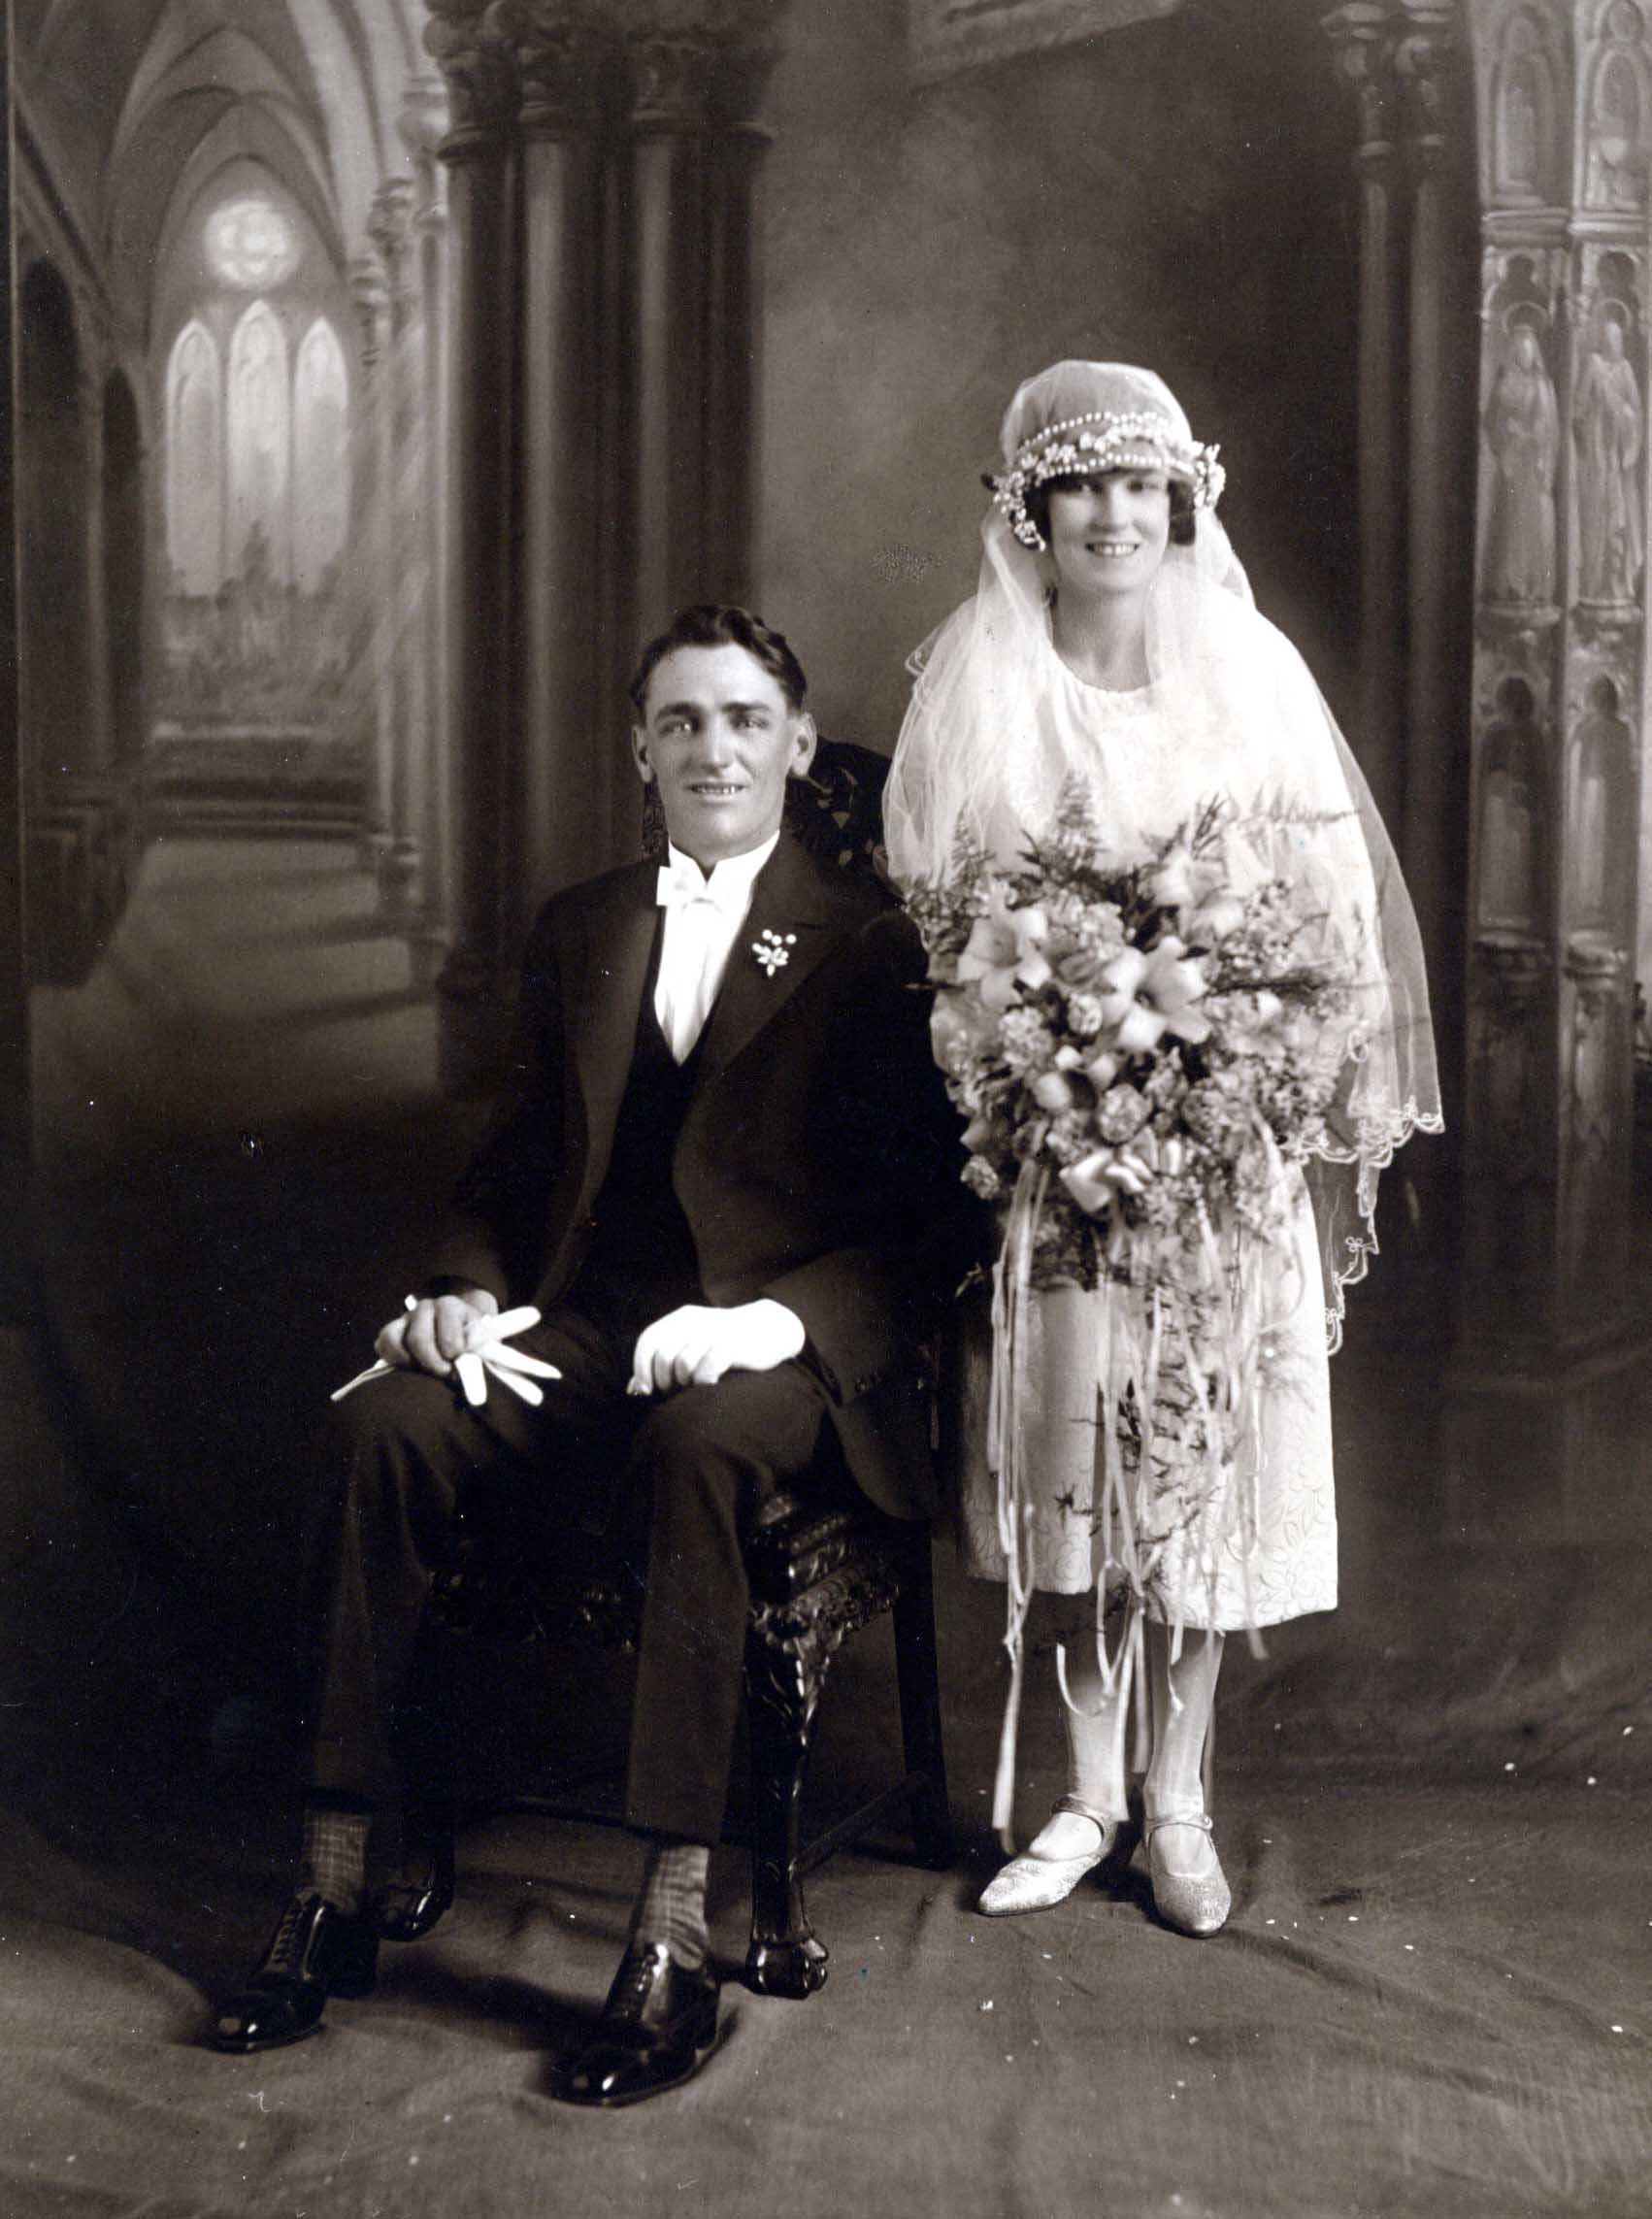 Ethel and Alec Russell